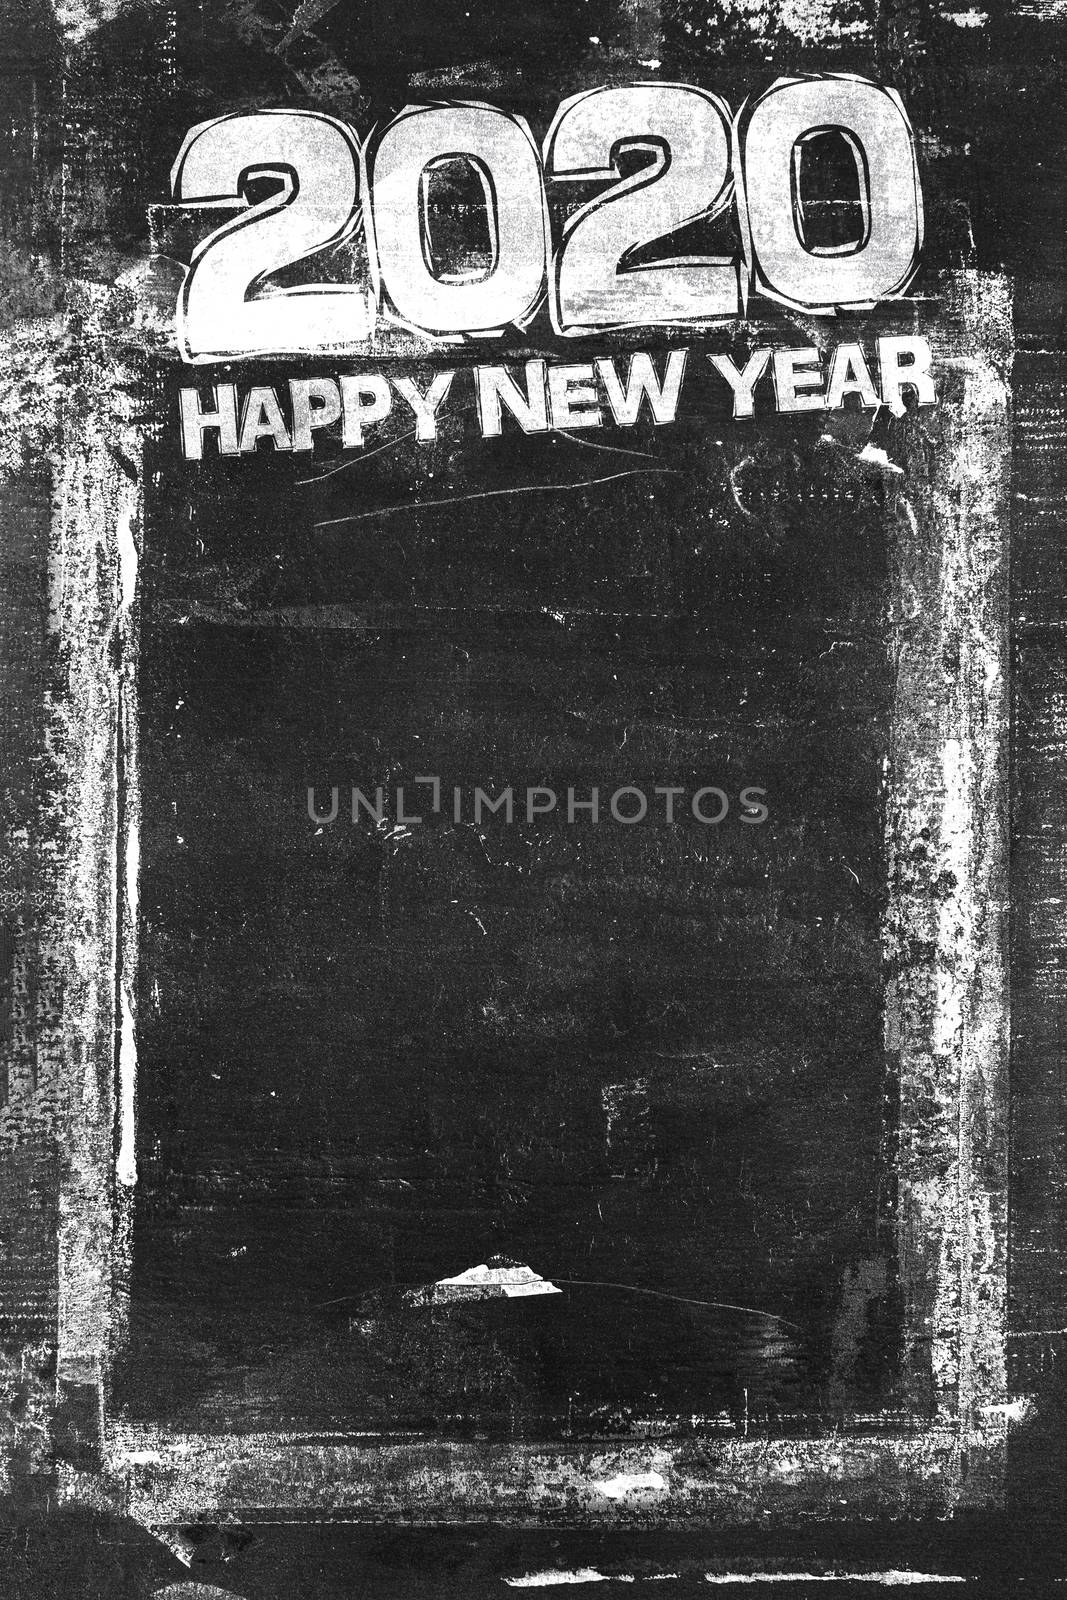 Happy New Year 2020 Grungy Chalkboard Background. Weathered and distressed template. Dirty artistic design element. Doodle frame. Fully editable. It can be used as a party invitation, food menu, poster, wallpaper and more.